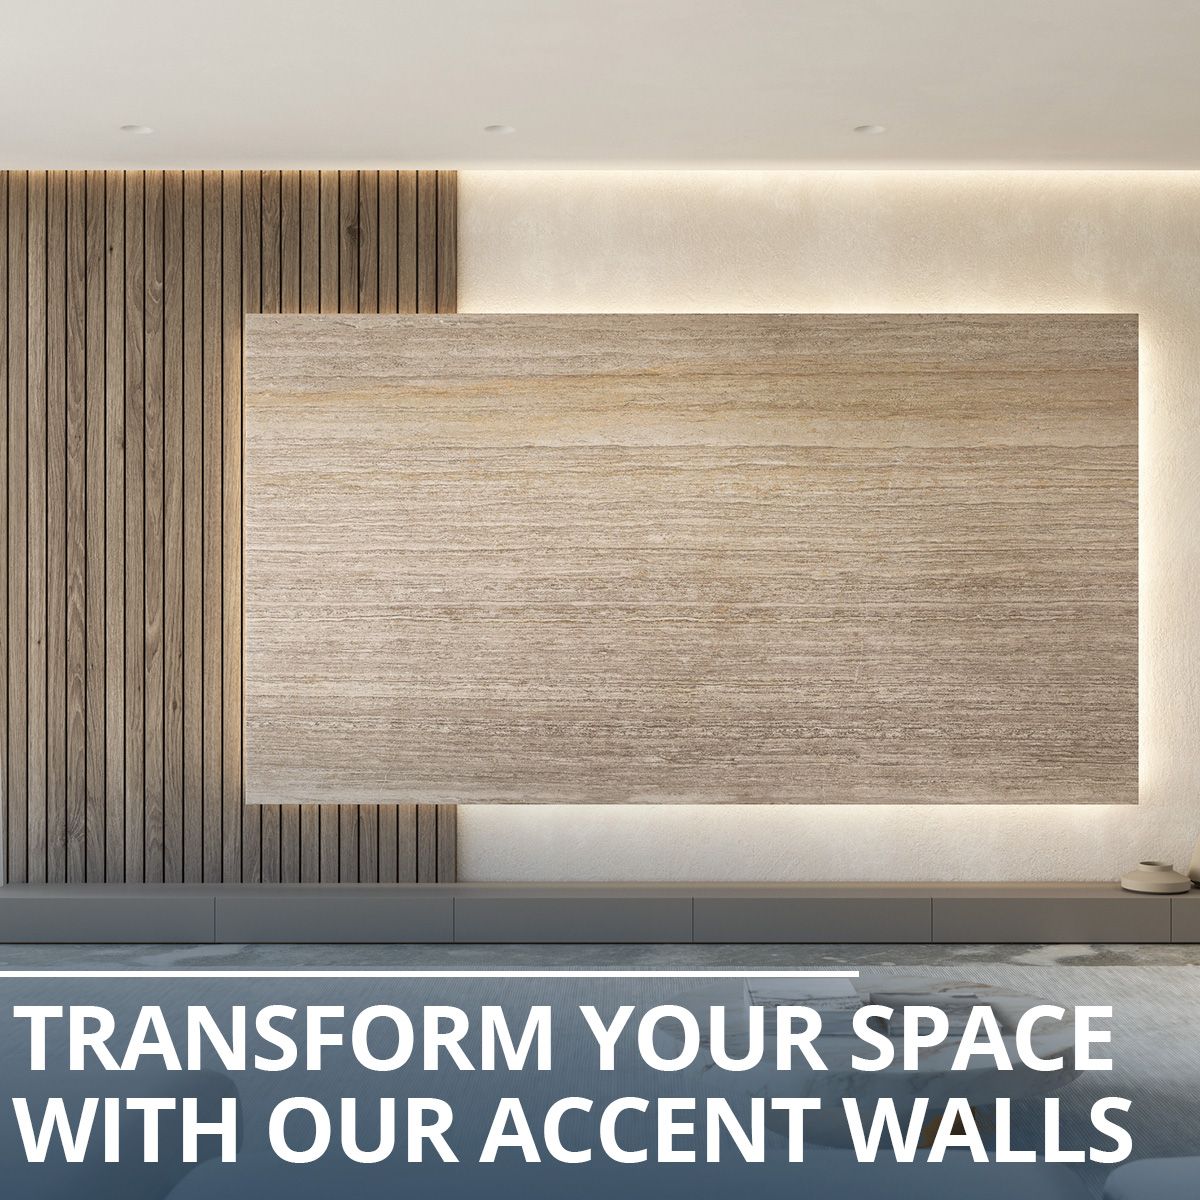 Transform Your Space With Our Accent Walls